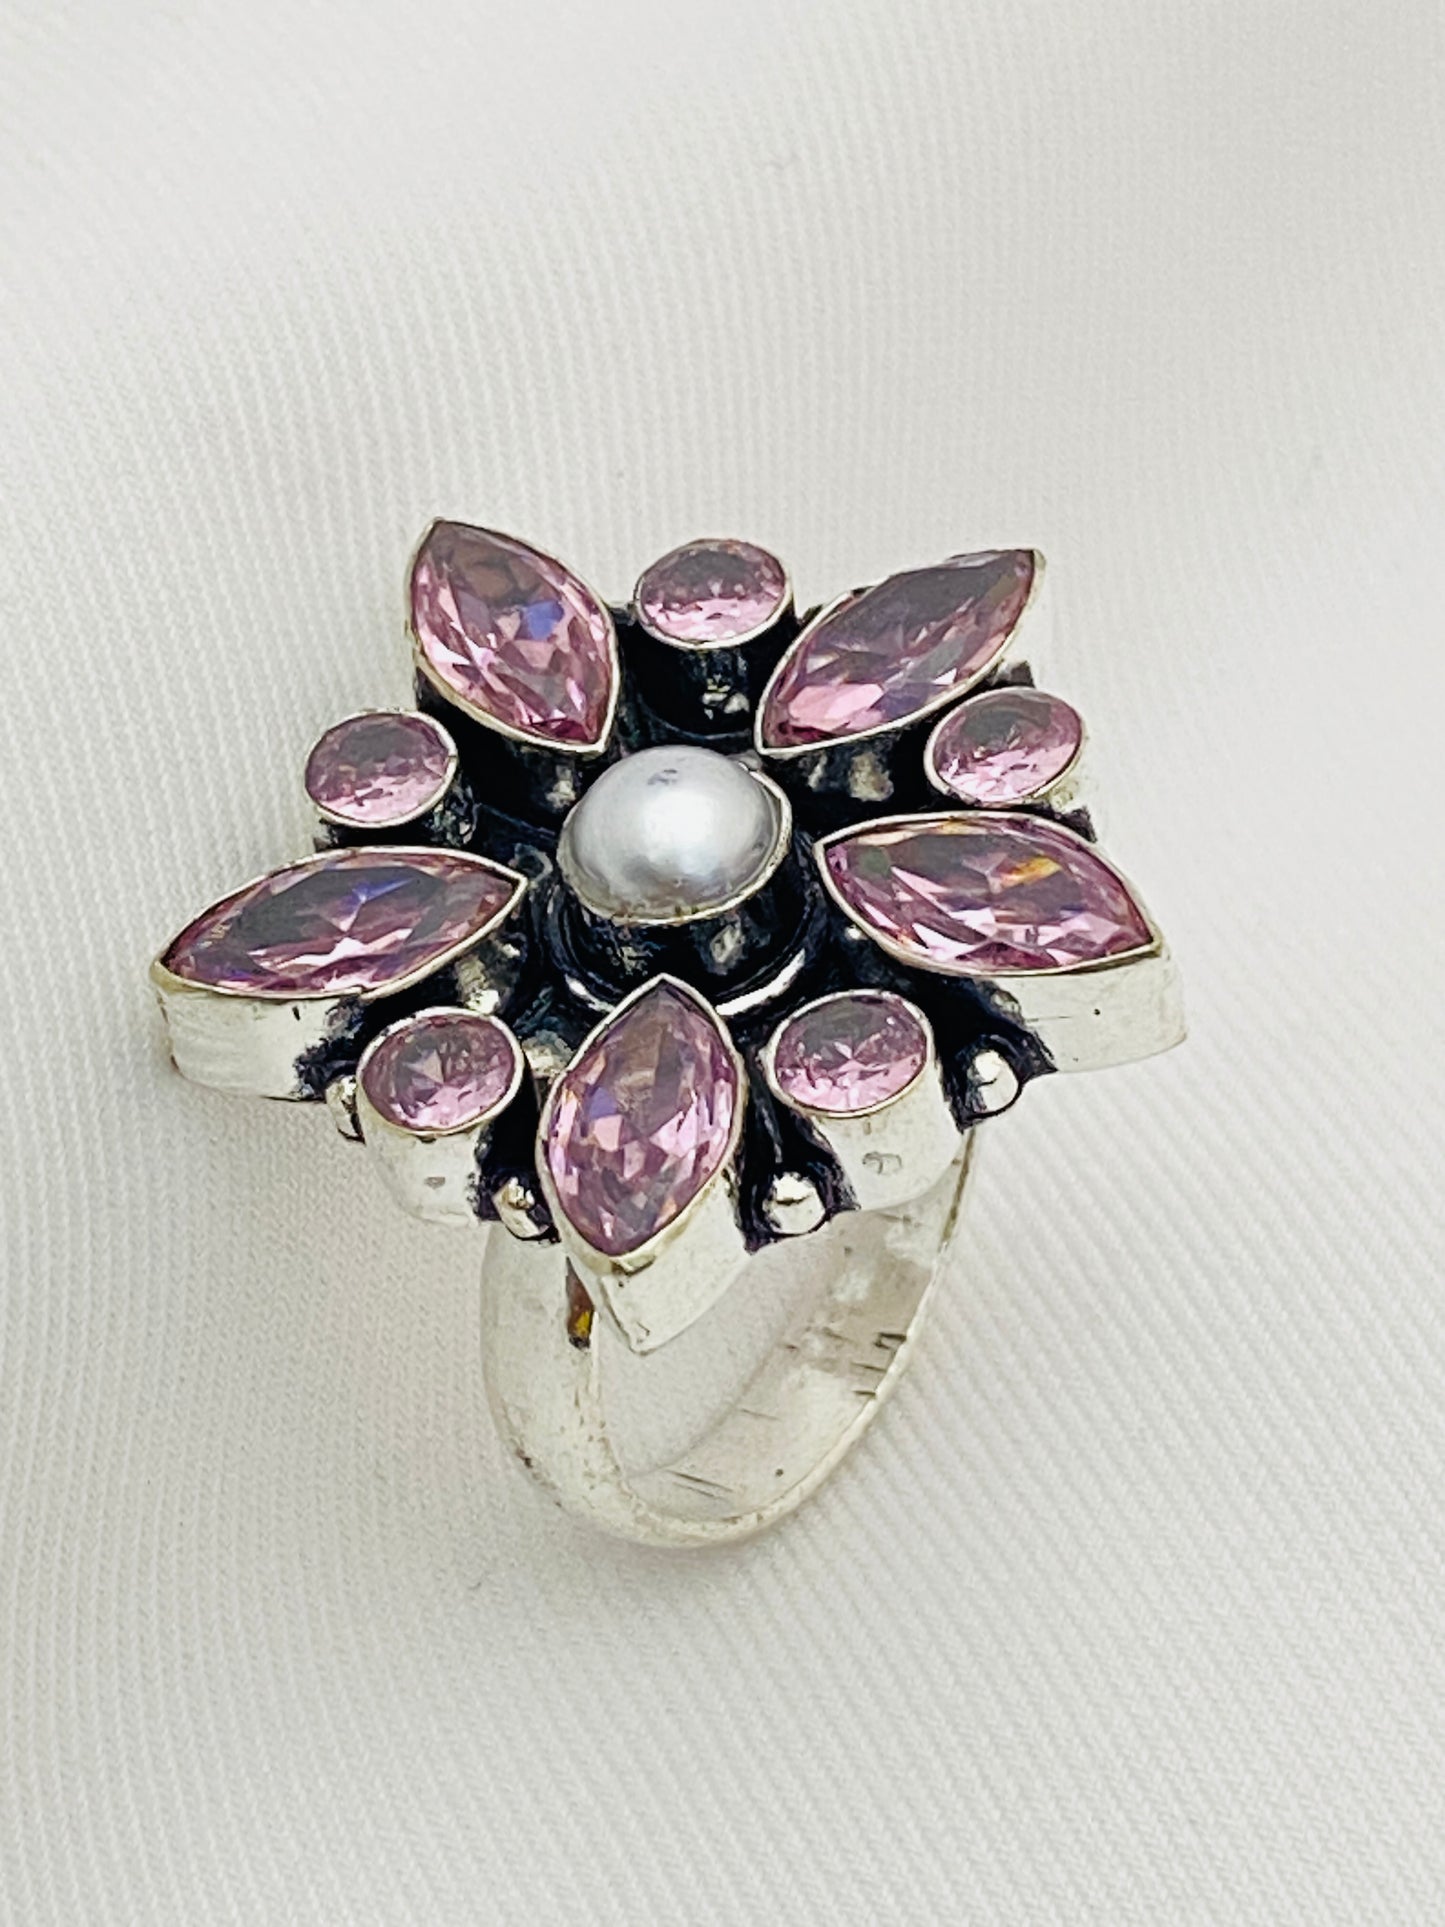 Flower Designed Wedding Decoration Ring With Pearl Bead in Litchfield Park